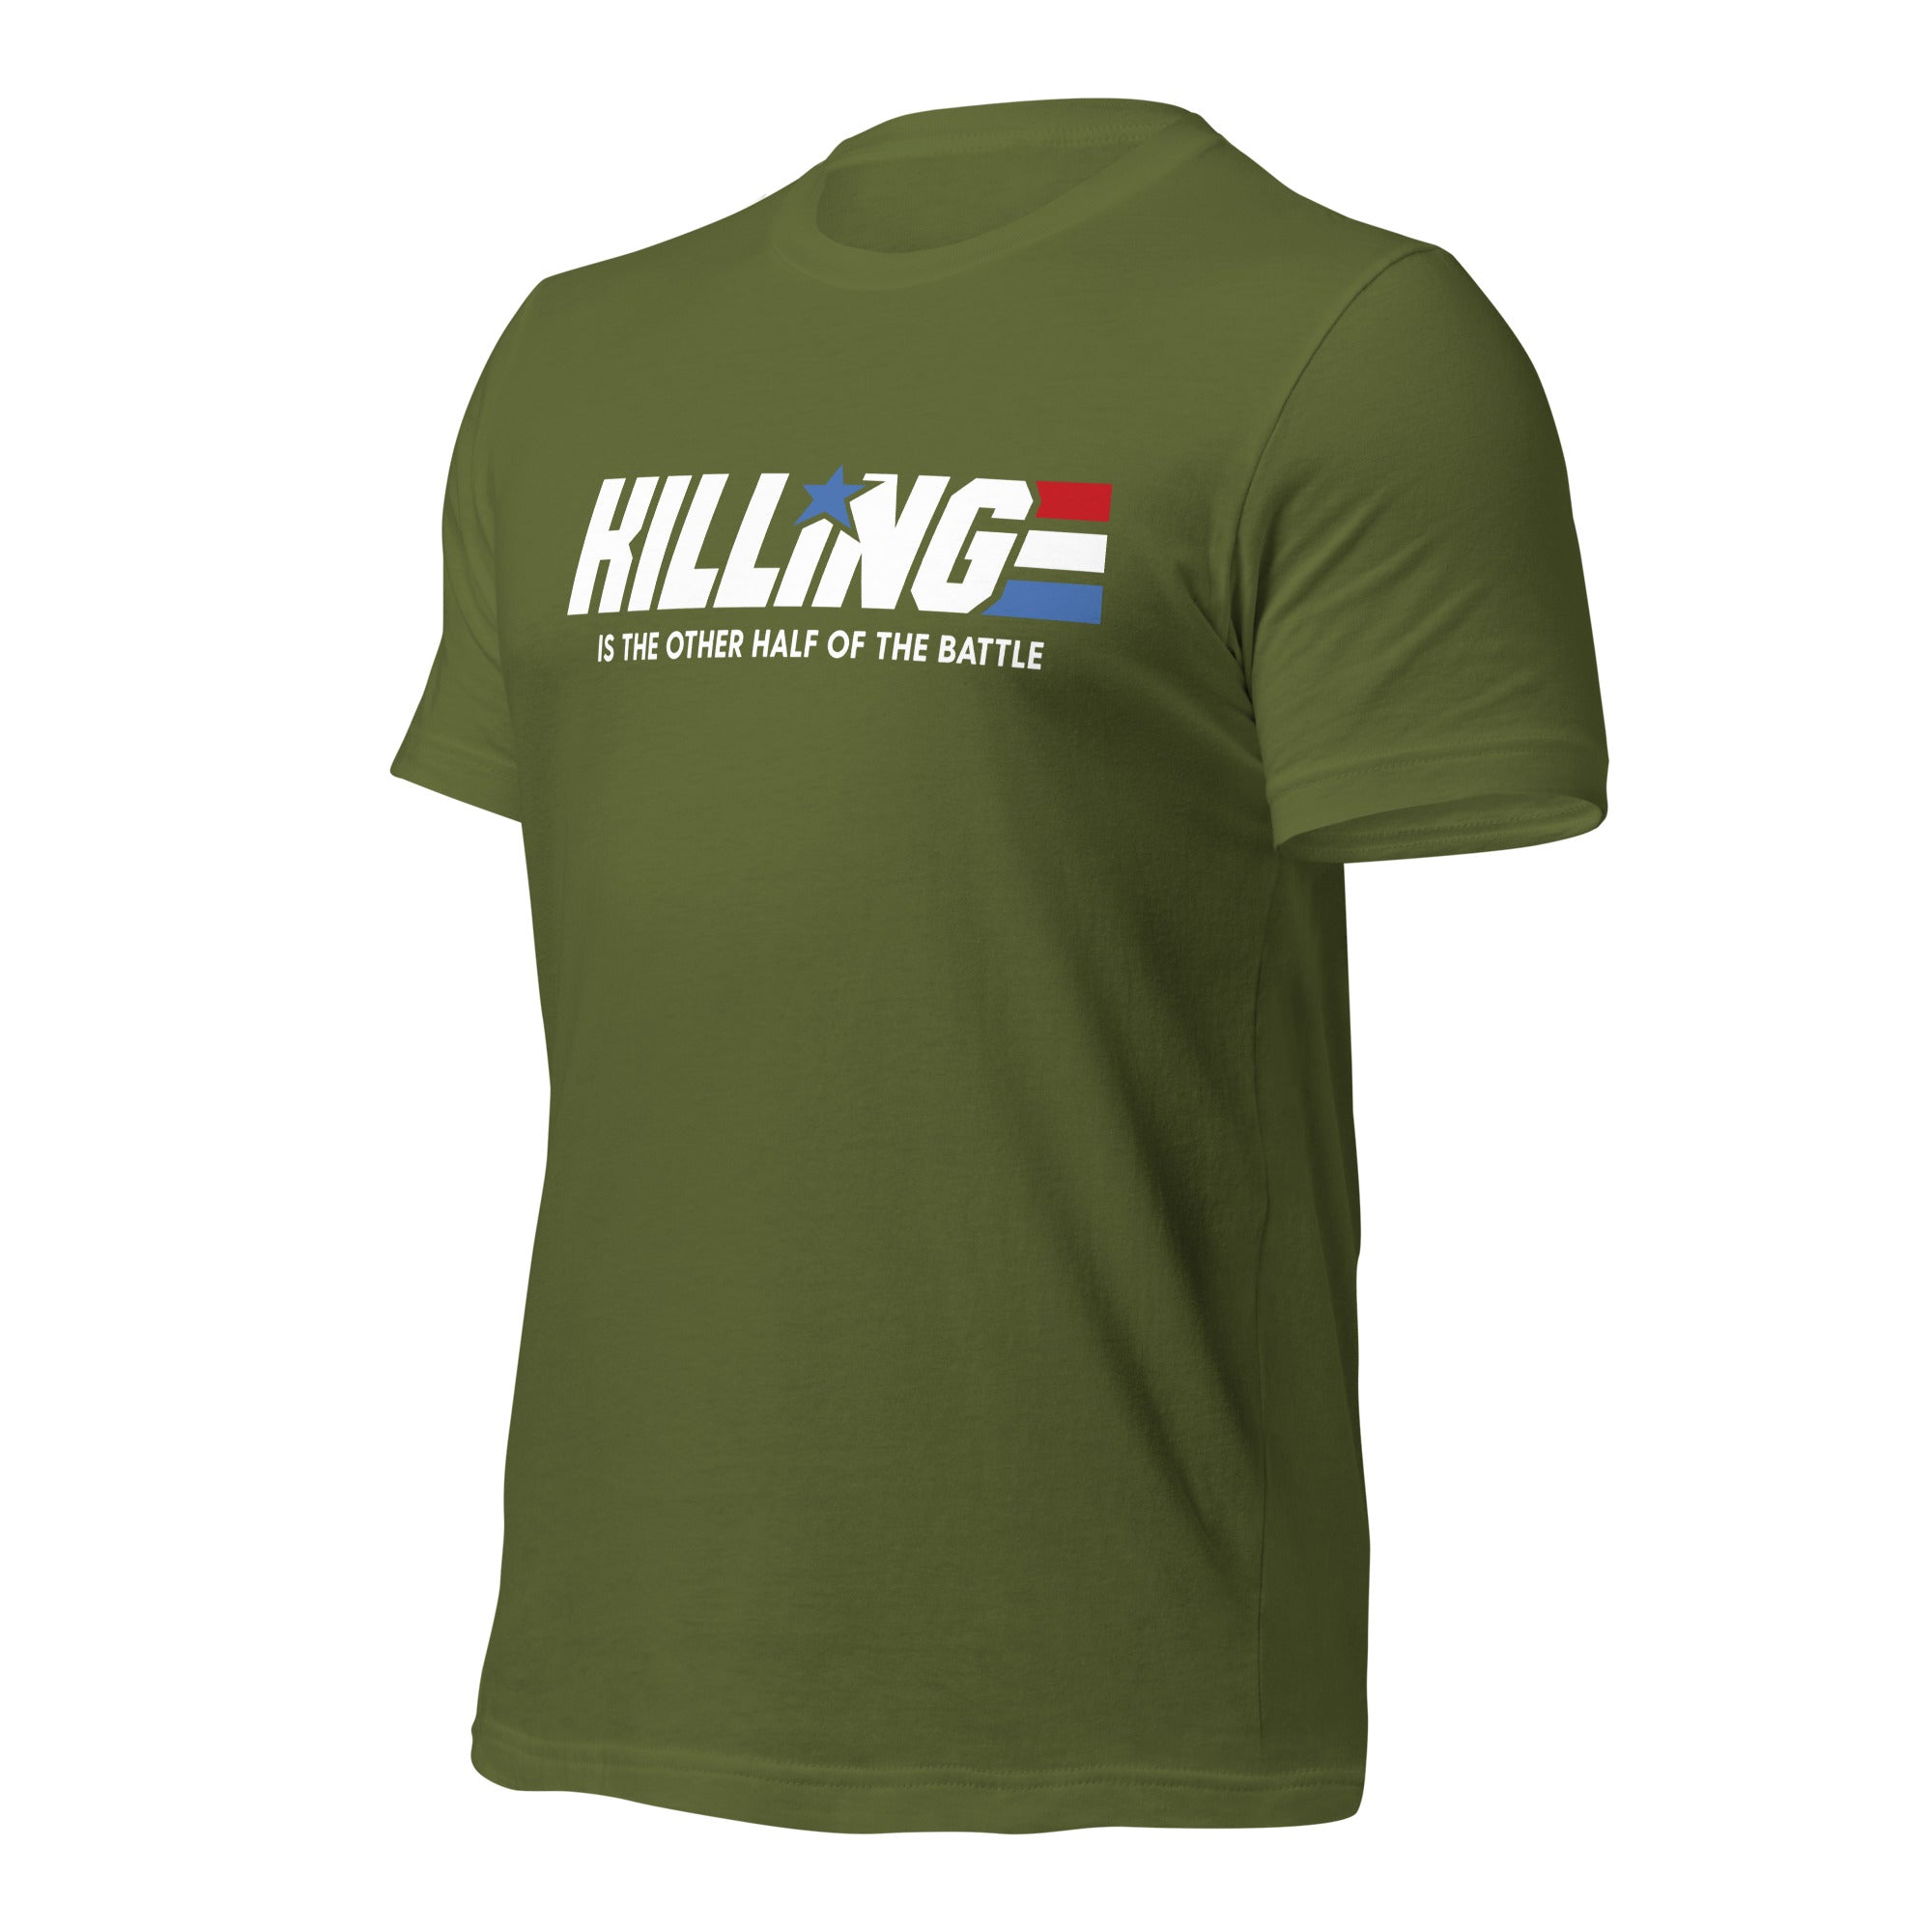 Killing Is the Other Half of the Battle T-Shirt